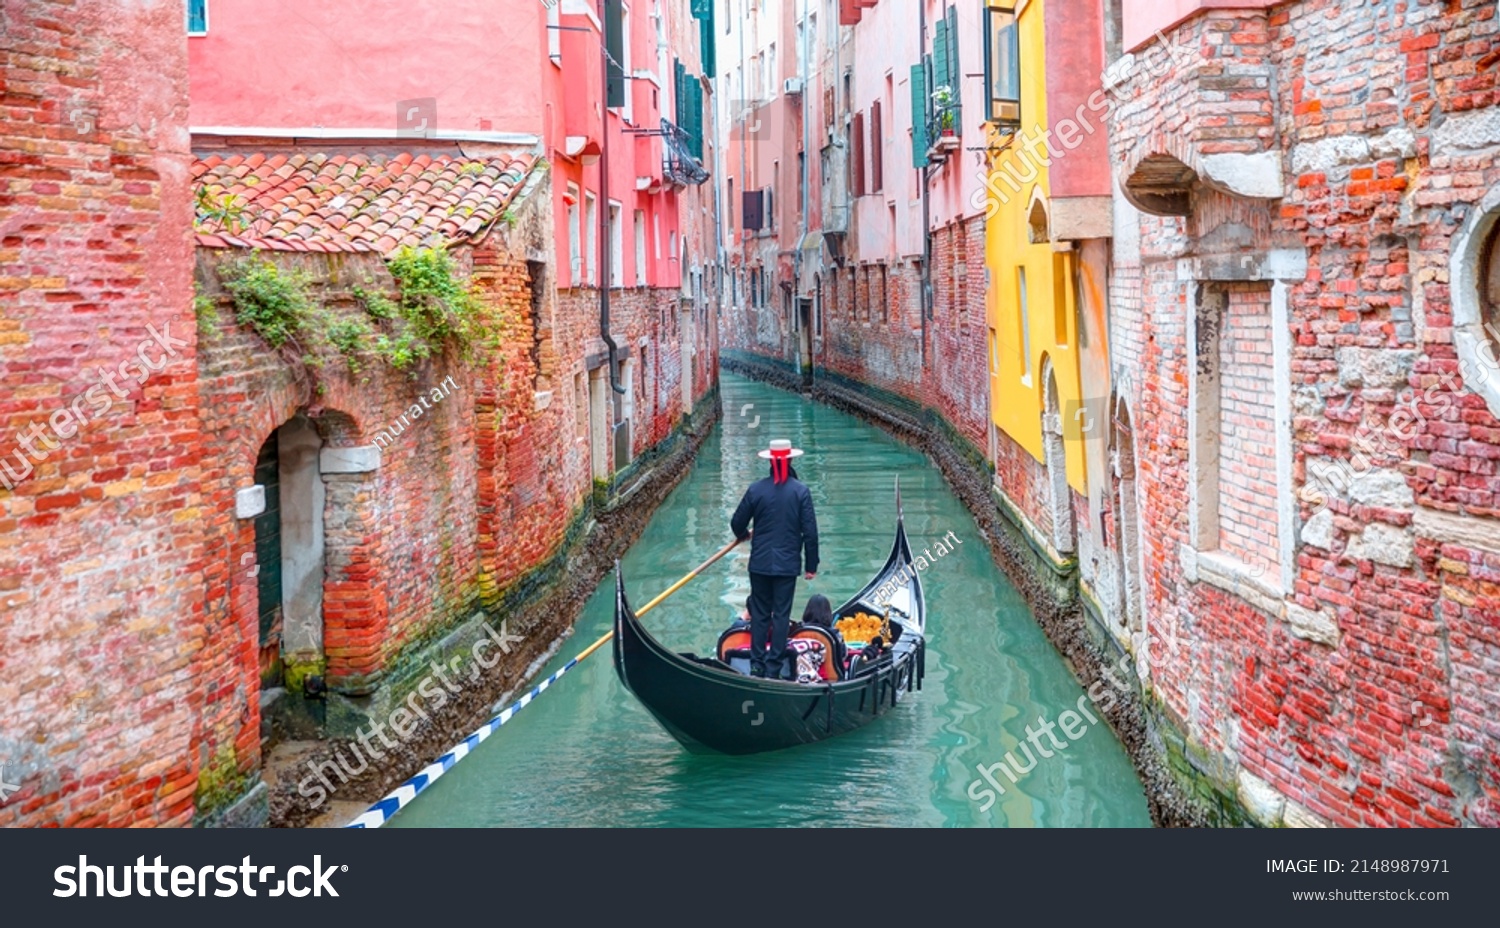 Venetian gondolier punting gondola through green canal waters of Venice Italy #2148987971